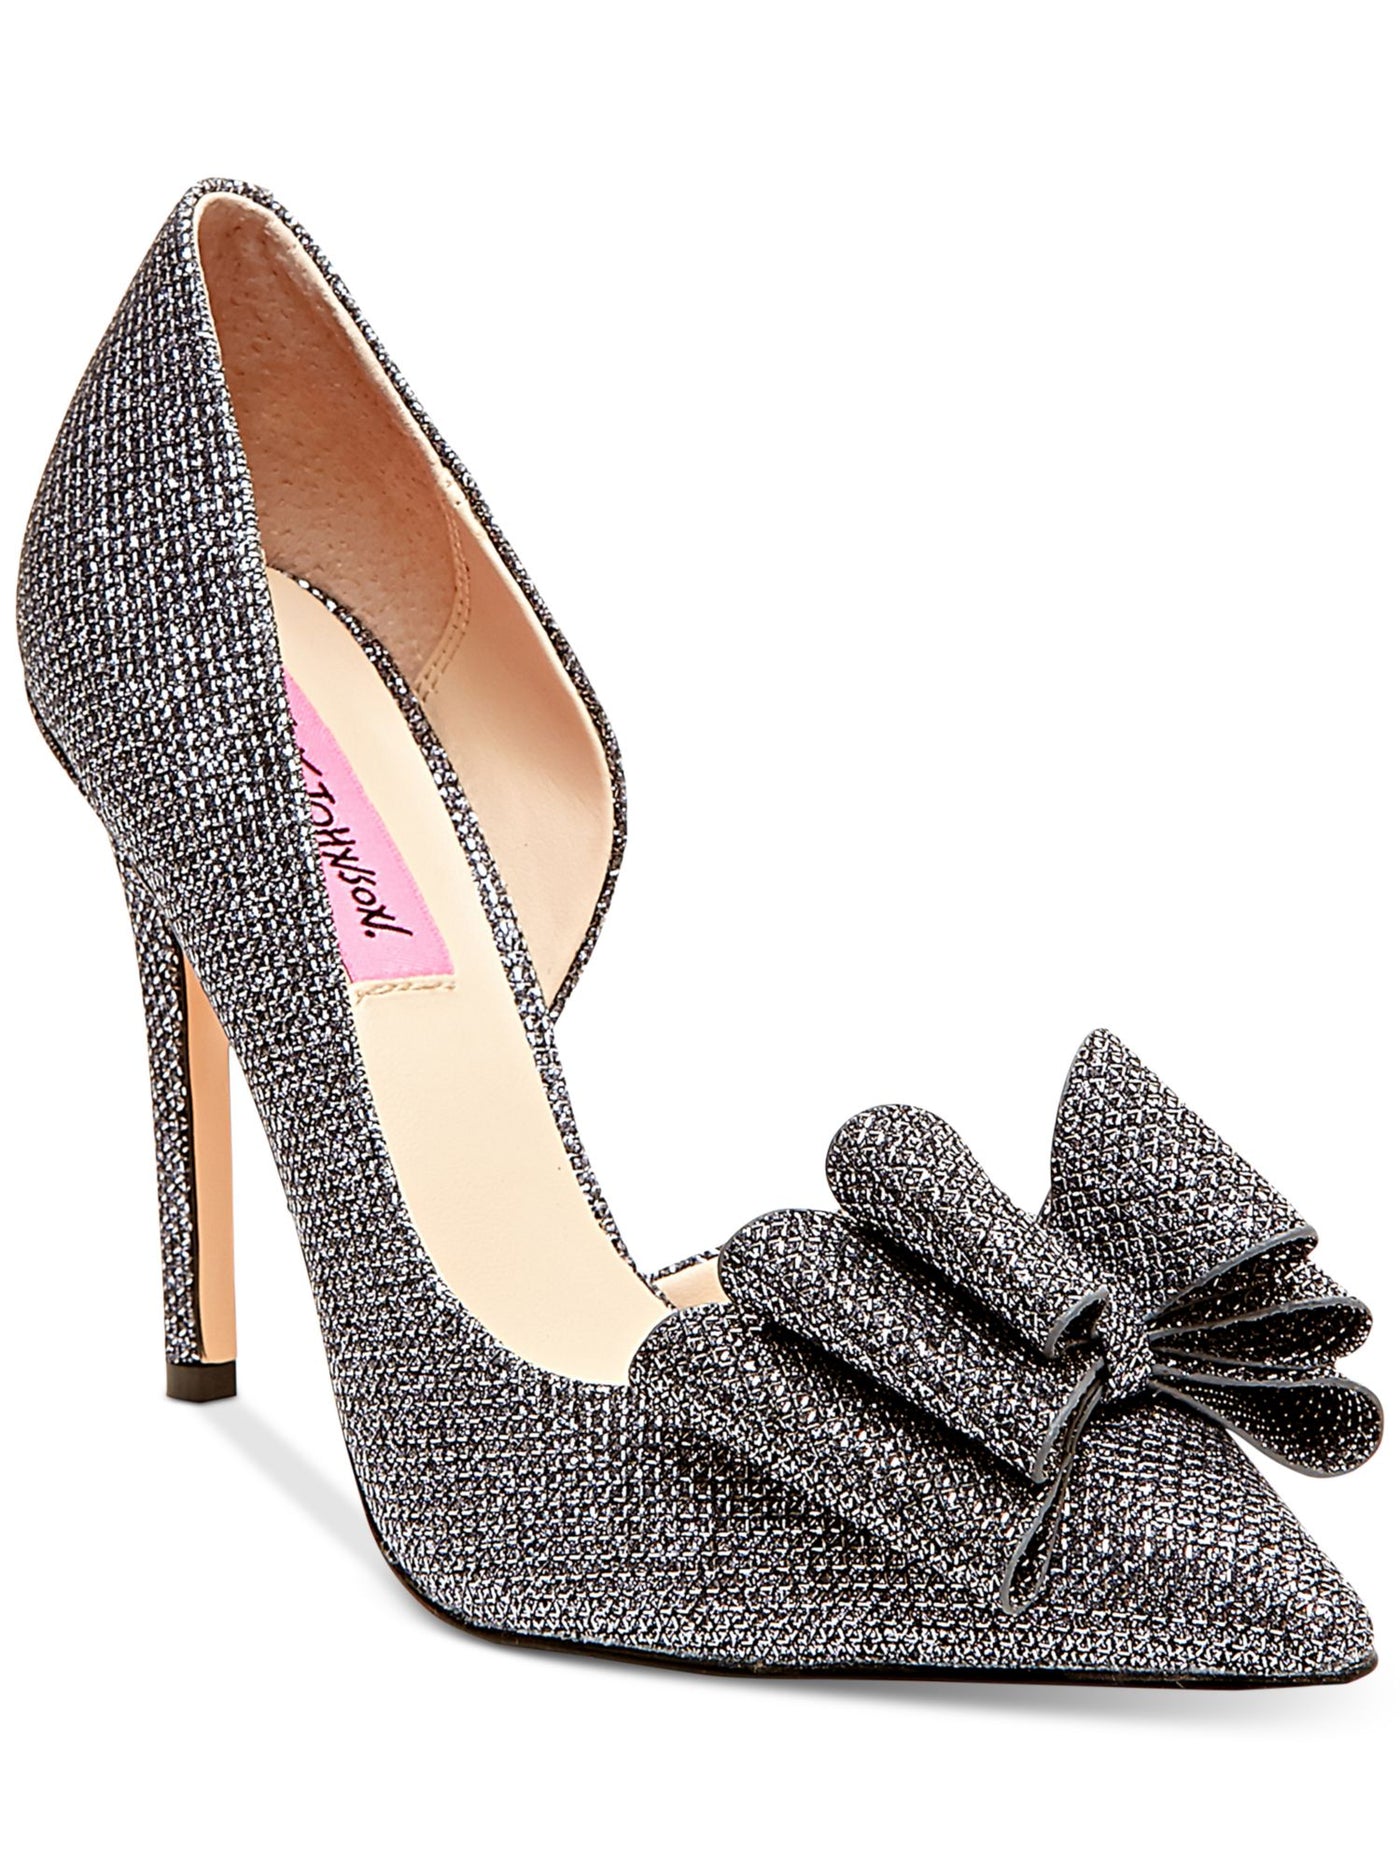 BETSEY JOHNSON Womens Gray Metallic Glitter Padded Bow Accent D Orsay Prince Pointed Toe Stiletto Slip On Dress Pumps Shoes 9 M